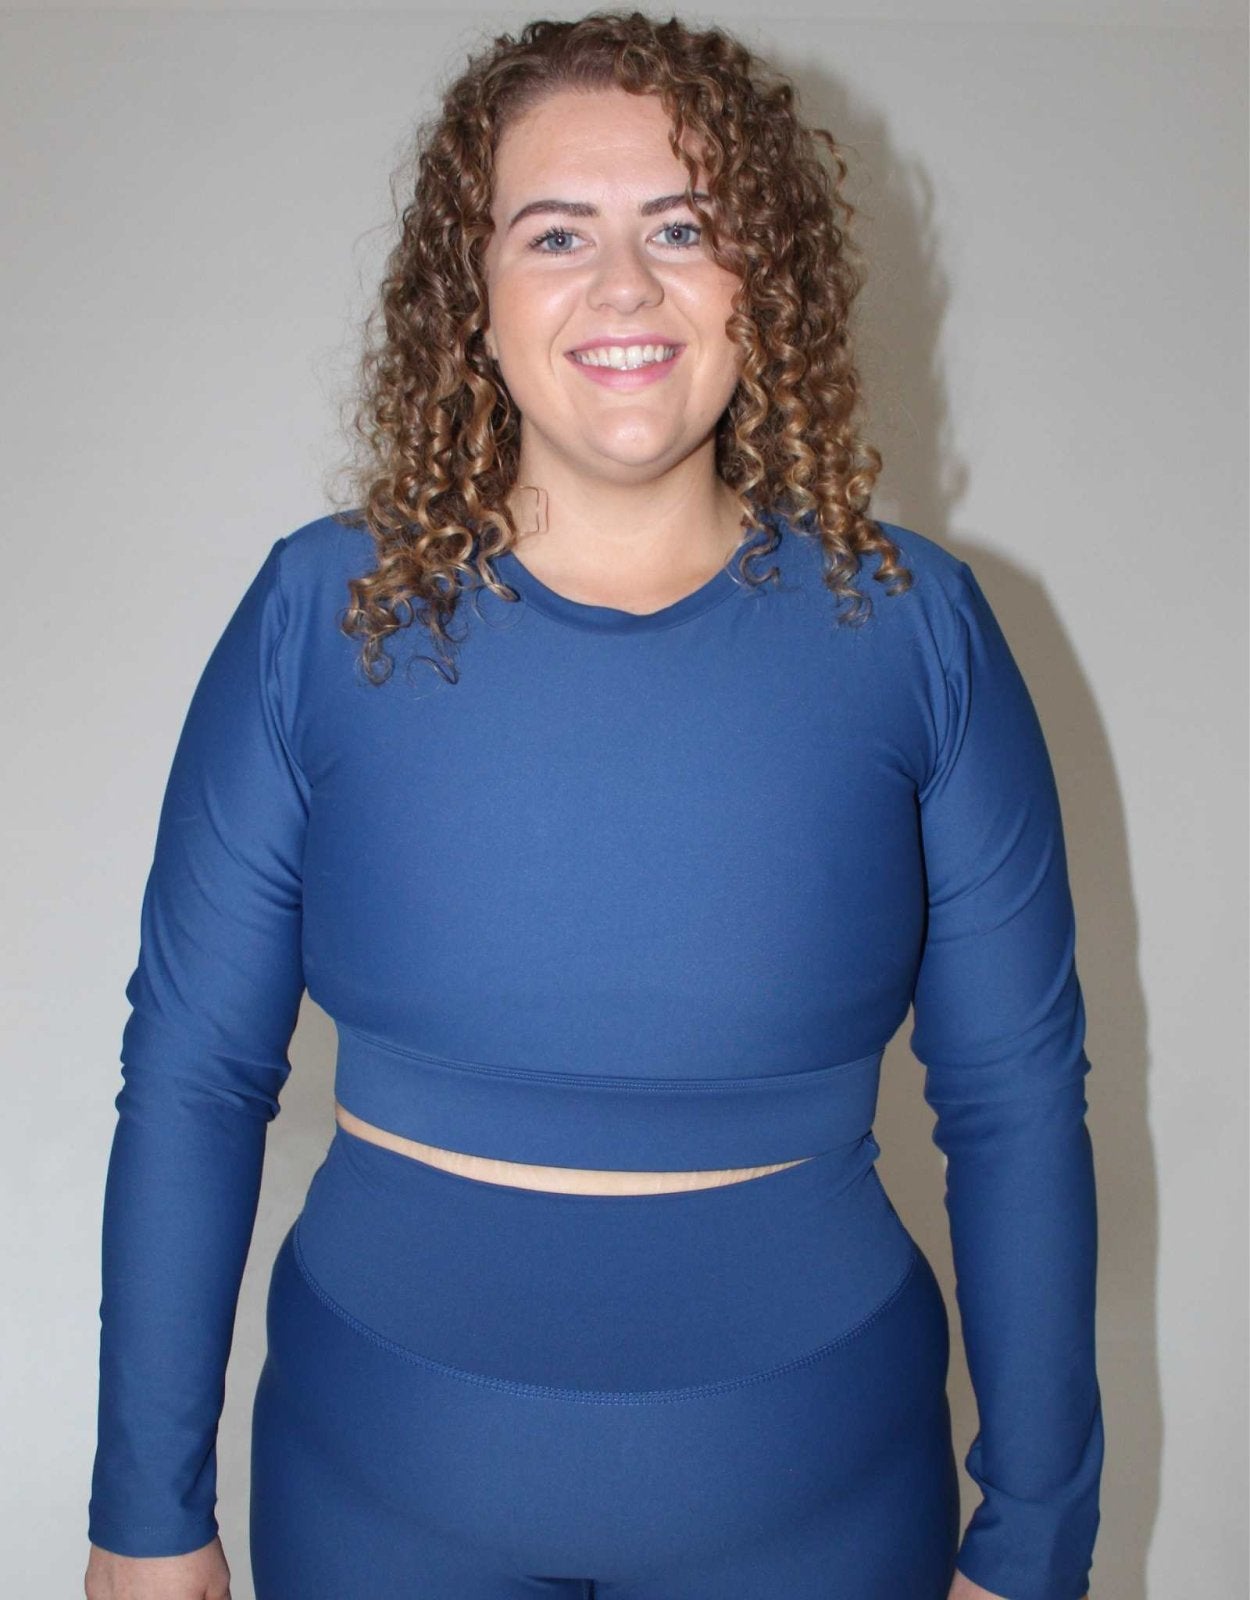 Girl wearing blue long sleeve activewear top from Vocus Vit. She is smiling and happy. Has curly hair. Vocus vit is a sustainable women's activewear brand that uses recycled materials and ethical manufacturing. Based in Northern Ireland. Shipping worldwide.Sizes XS (8) TO XXL (18).